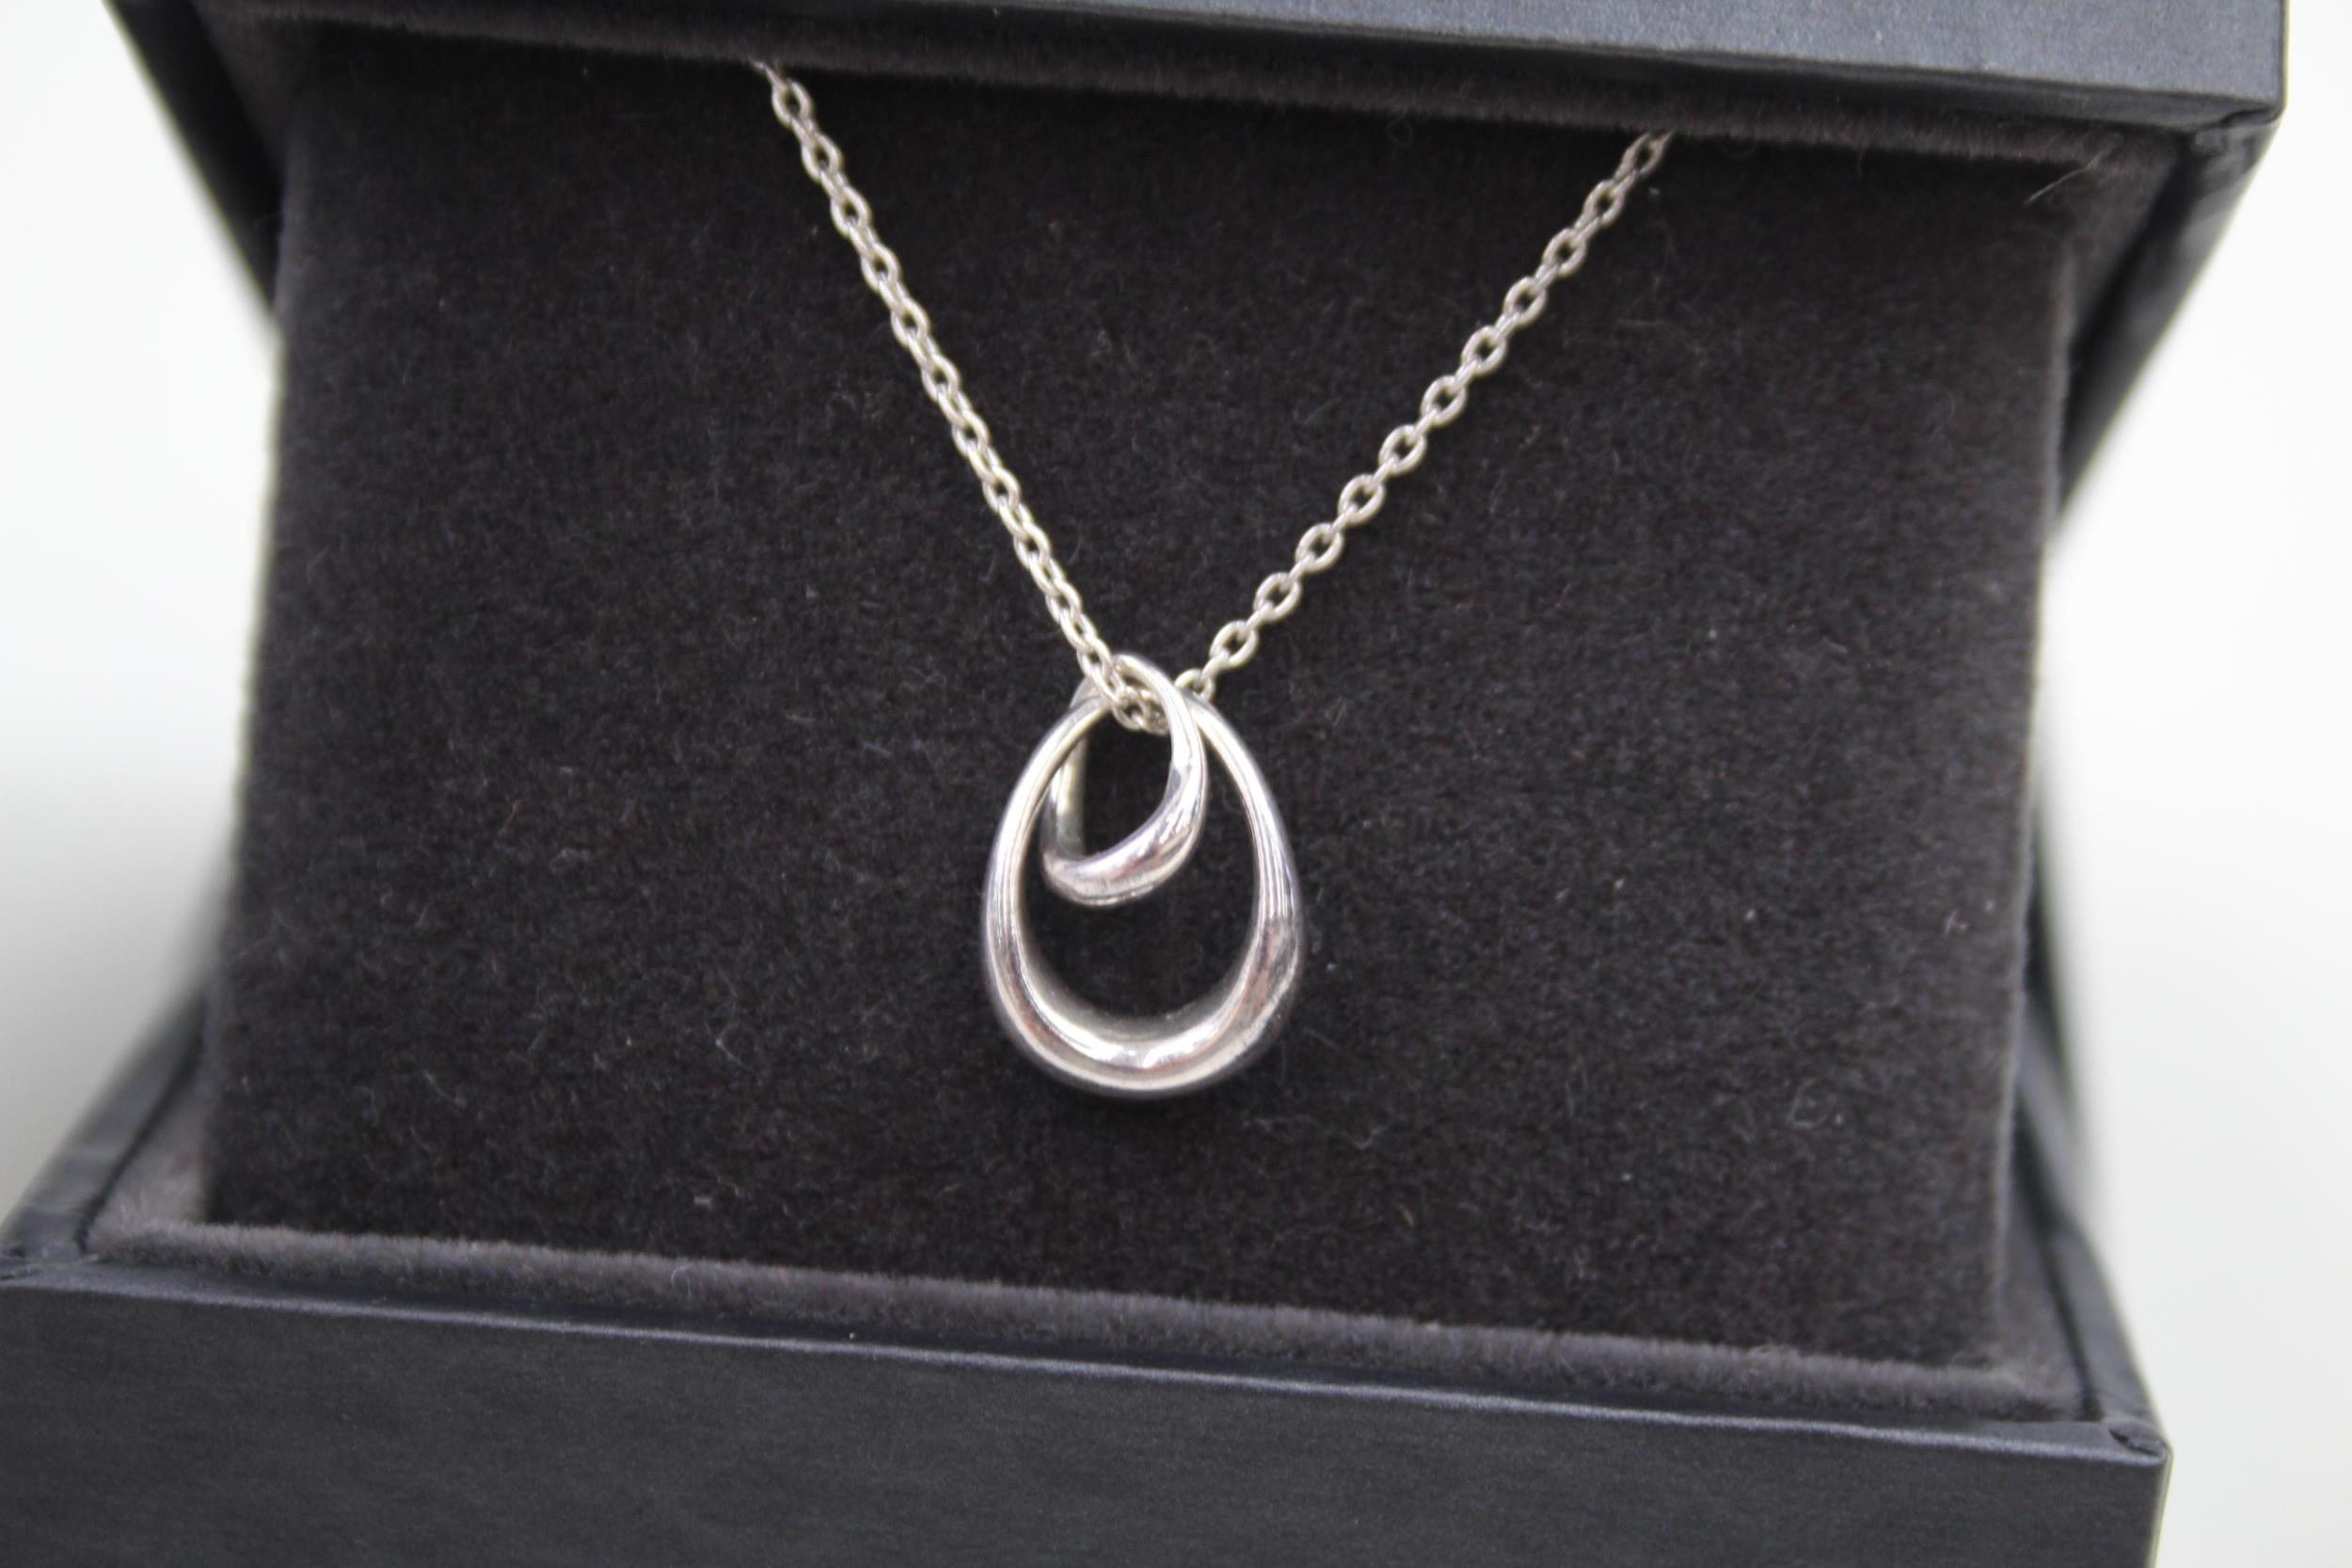 A silver pendant necklace by Georg Jensen (3g) - Image 3 of 5